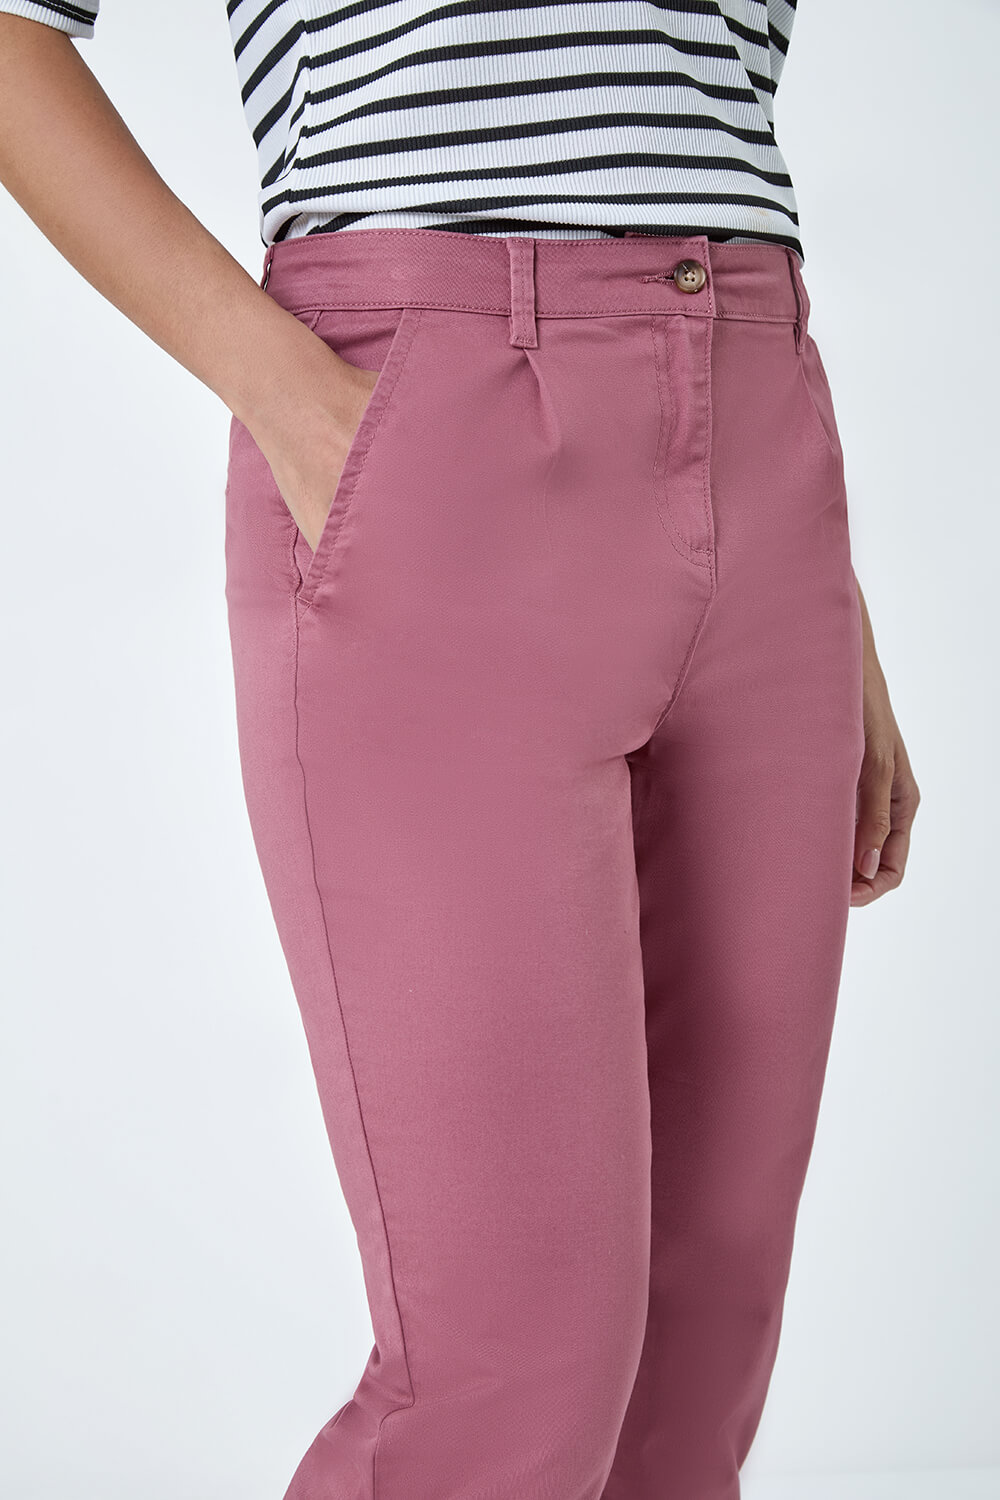 Rose Cotton Blend Washed Chino Trousers, Image 5 of 5